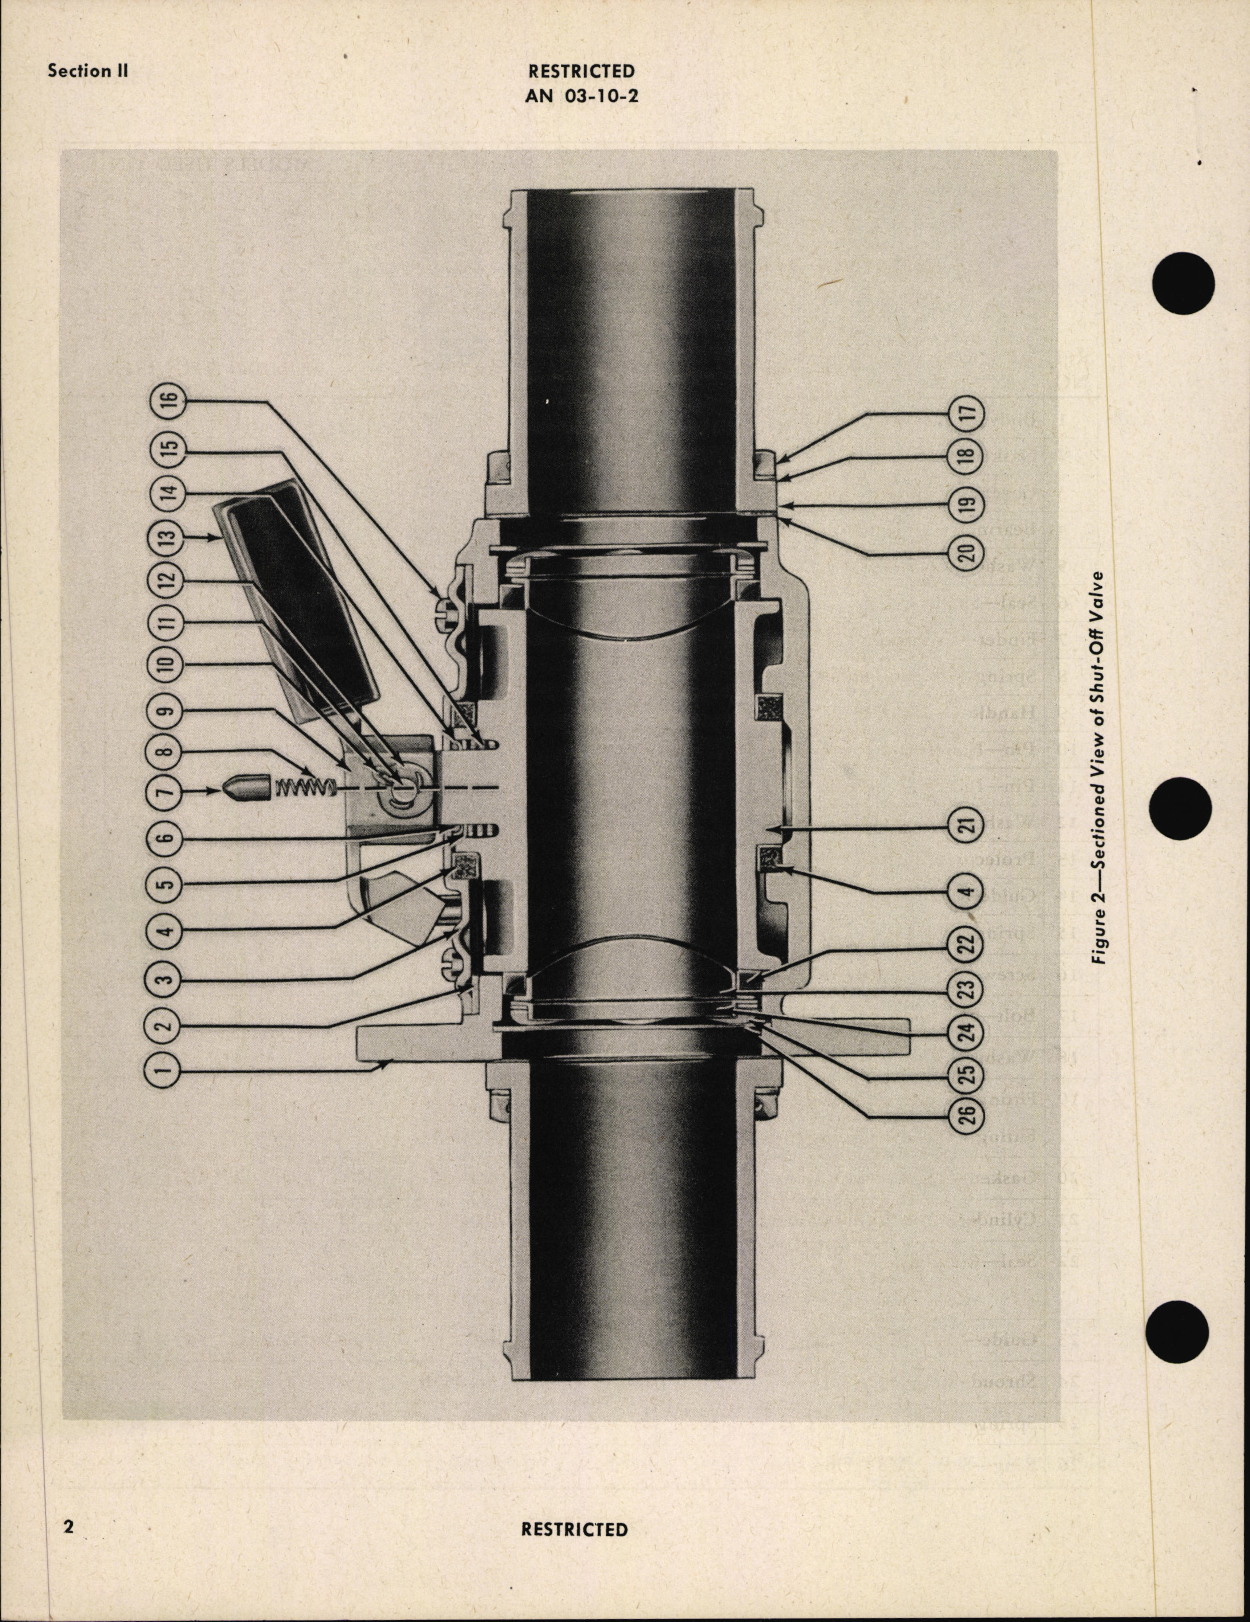 Sample page 6 from AirCorps Library document: Handbook of Instructions with Parts Catalog for Shut-Off Valves